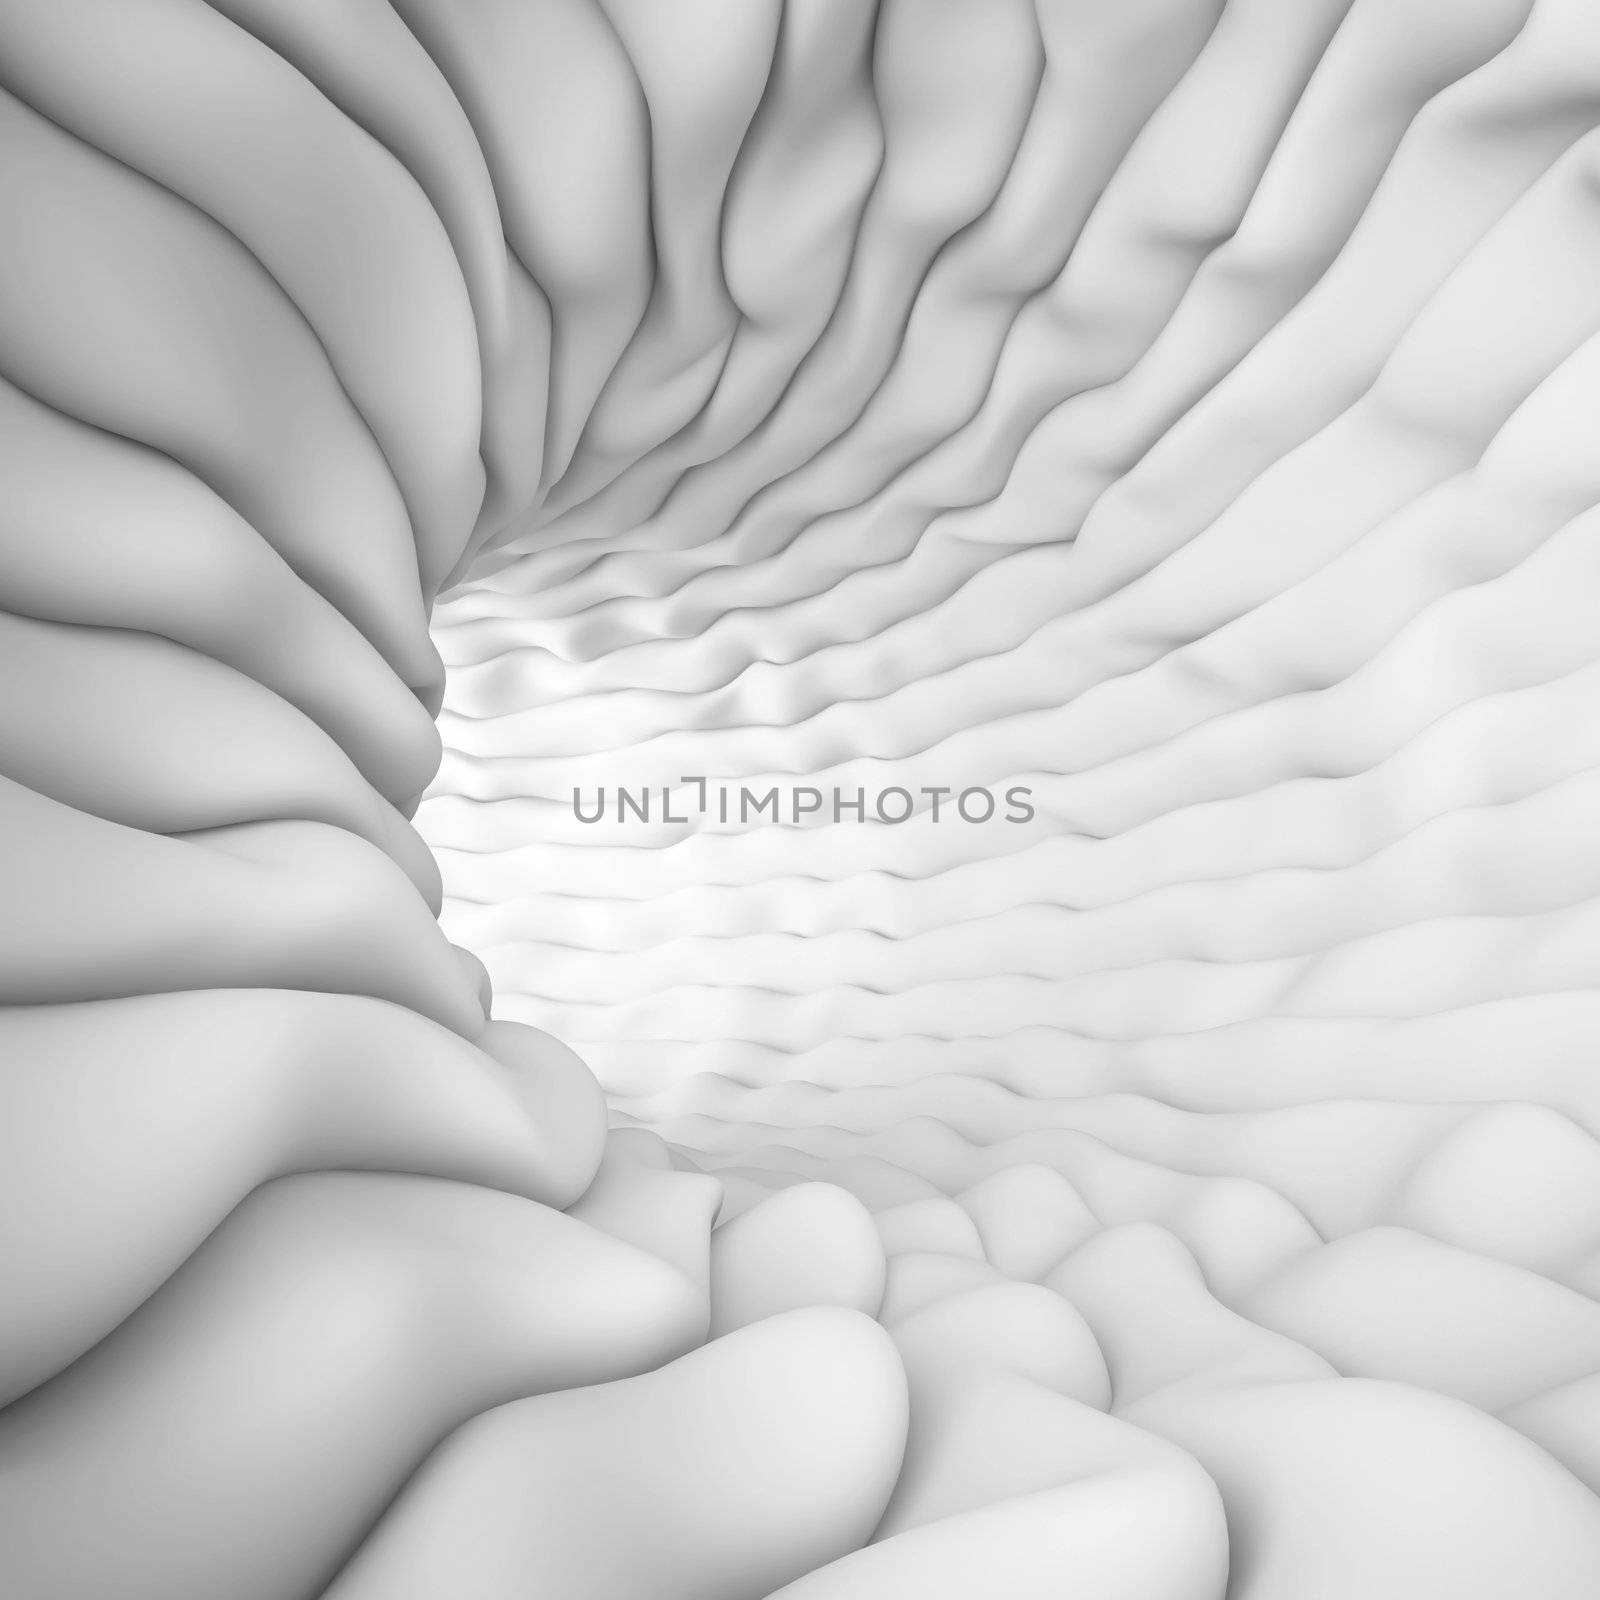 3d Illustration of White Abstract Tunnel Wallpaper